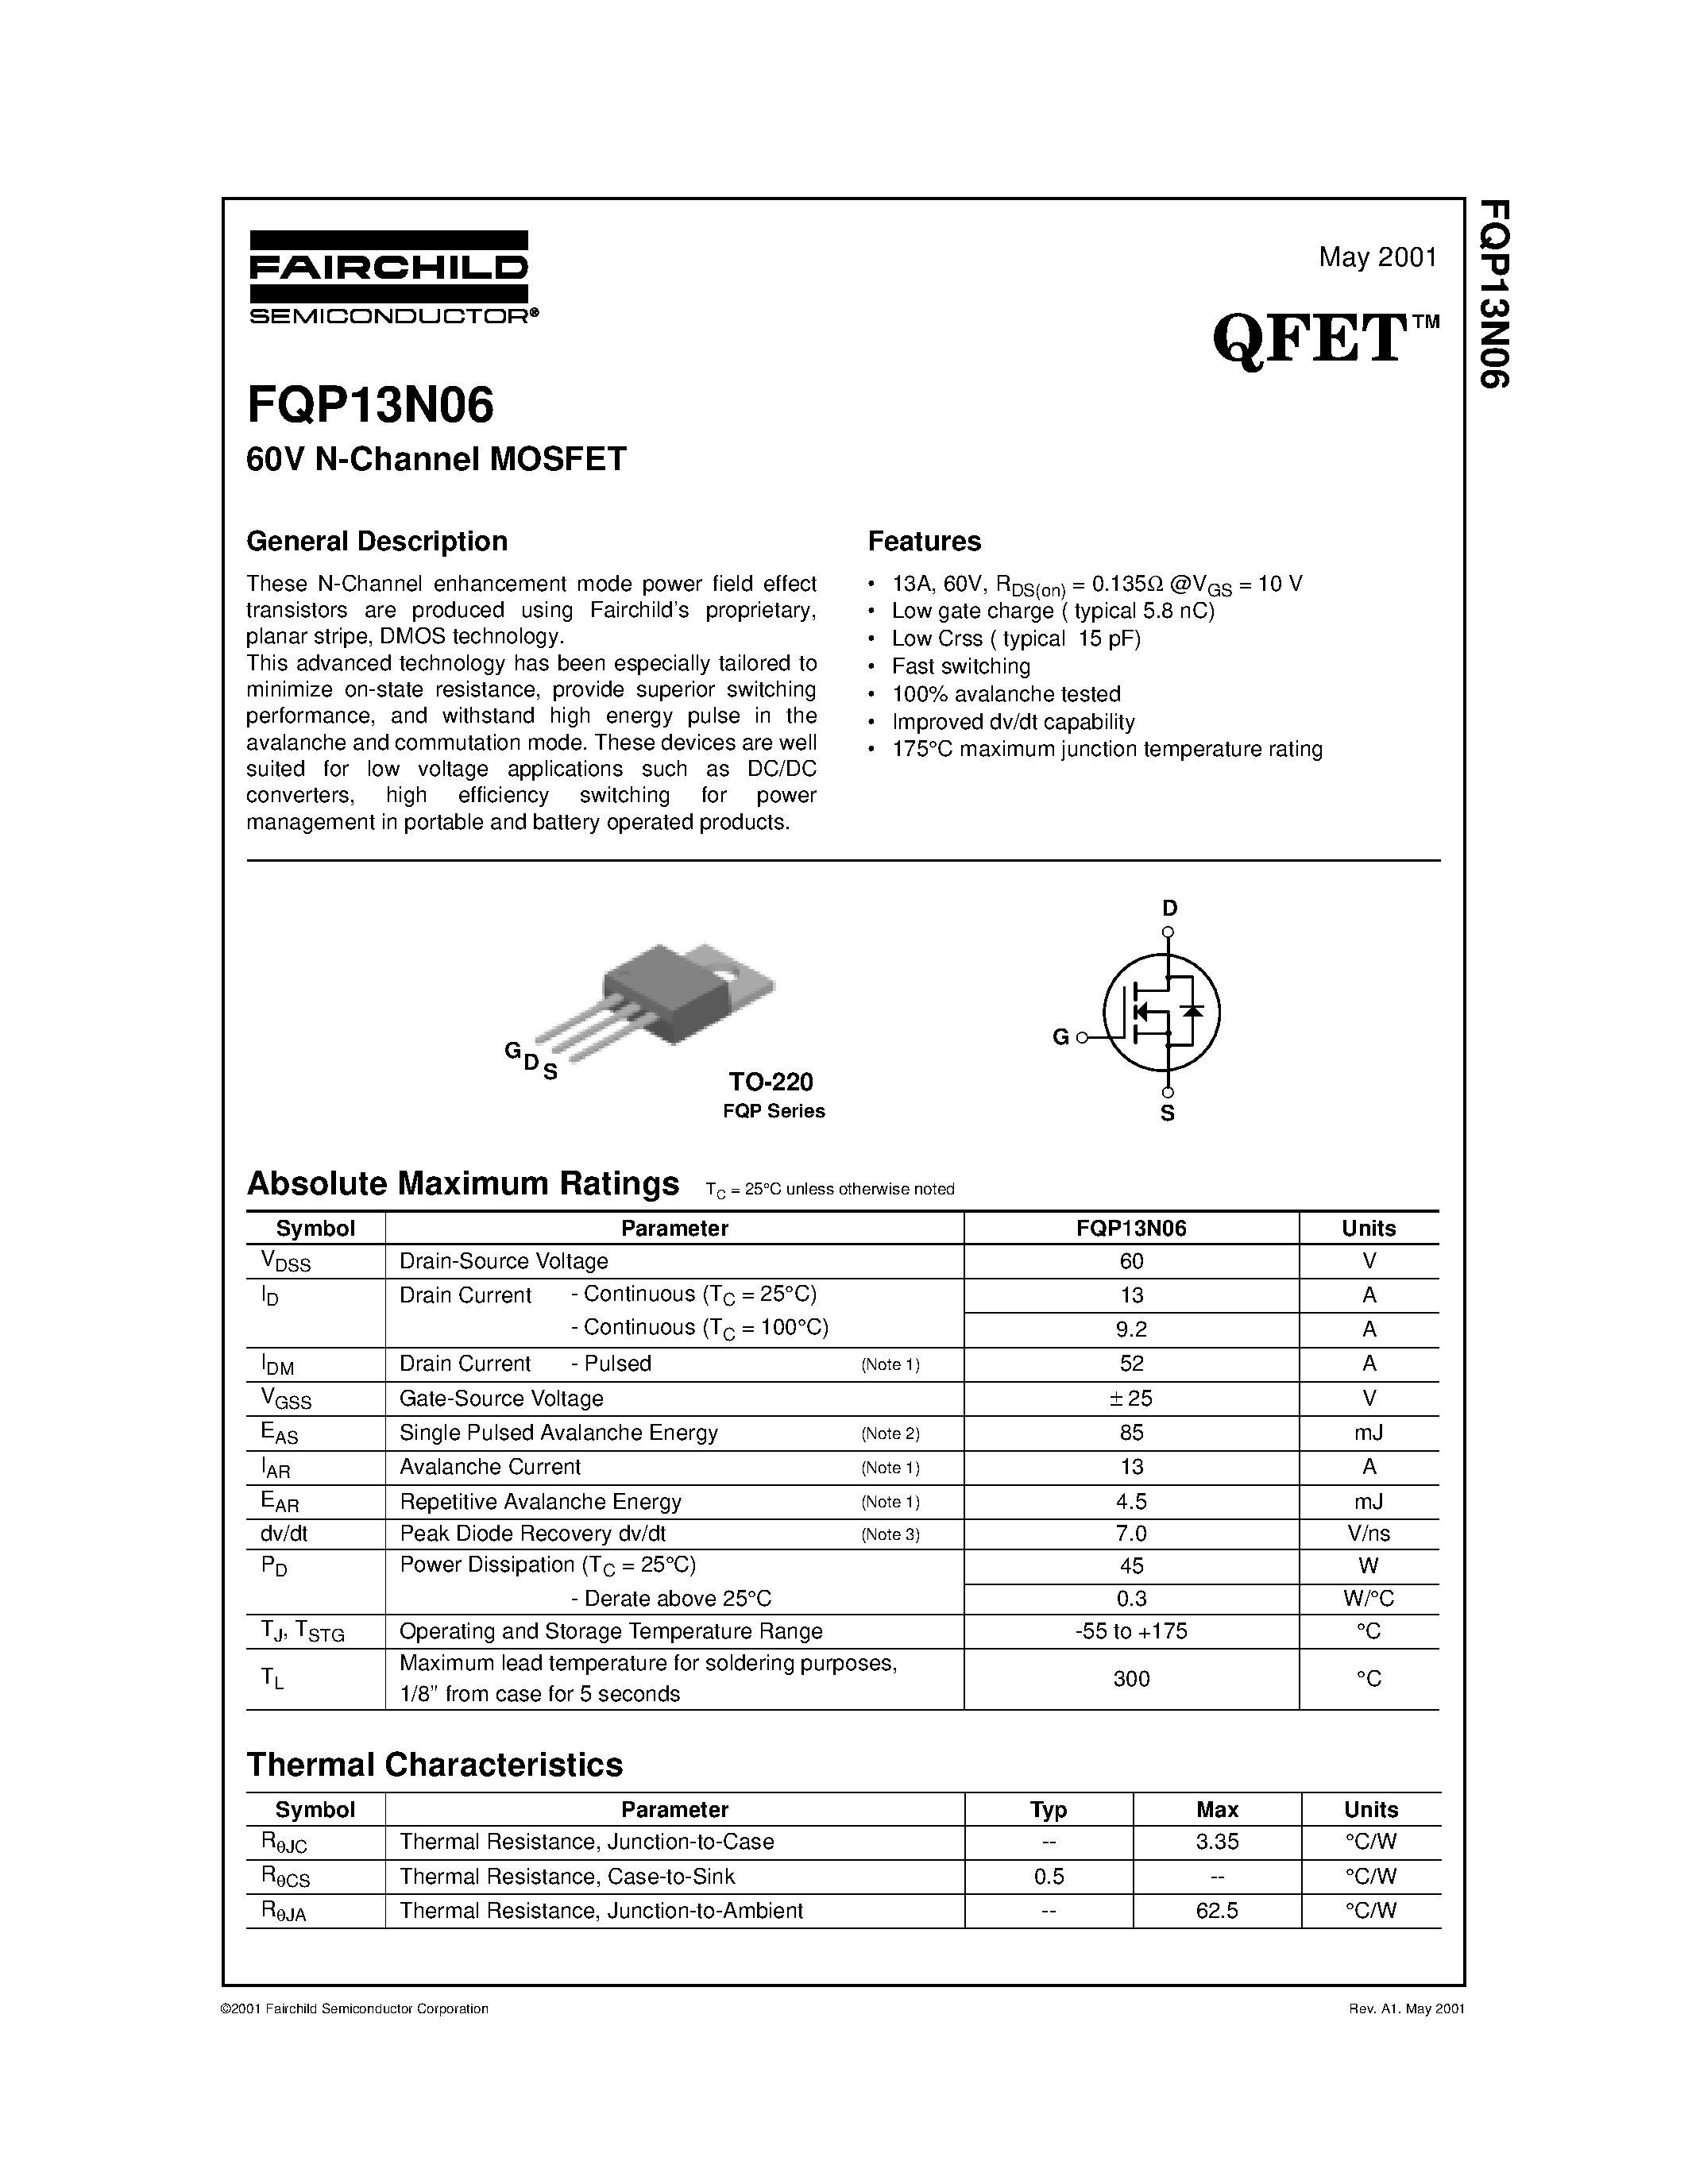 Datasheet FQP13N06 - 60V N-Channel MOSFET page 1